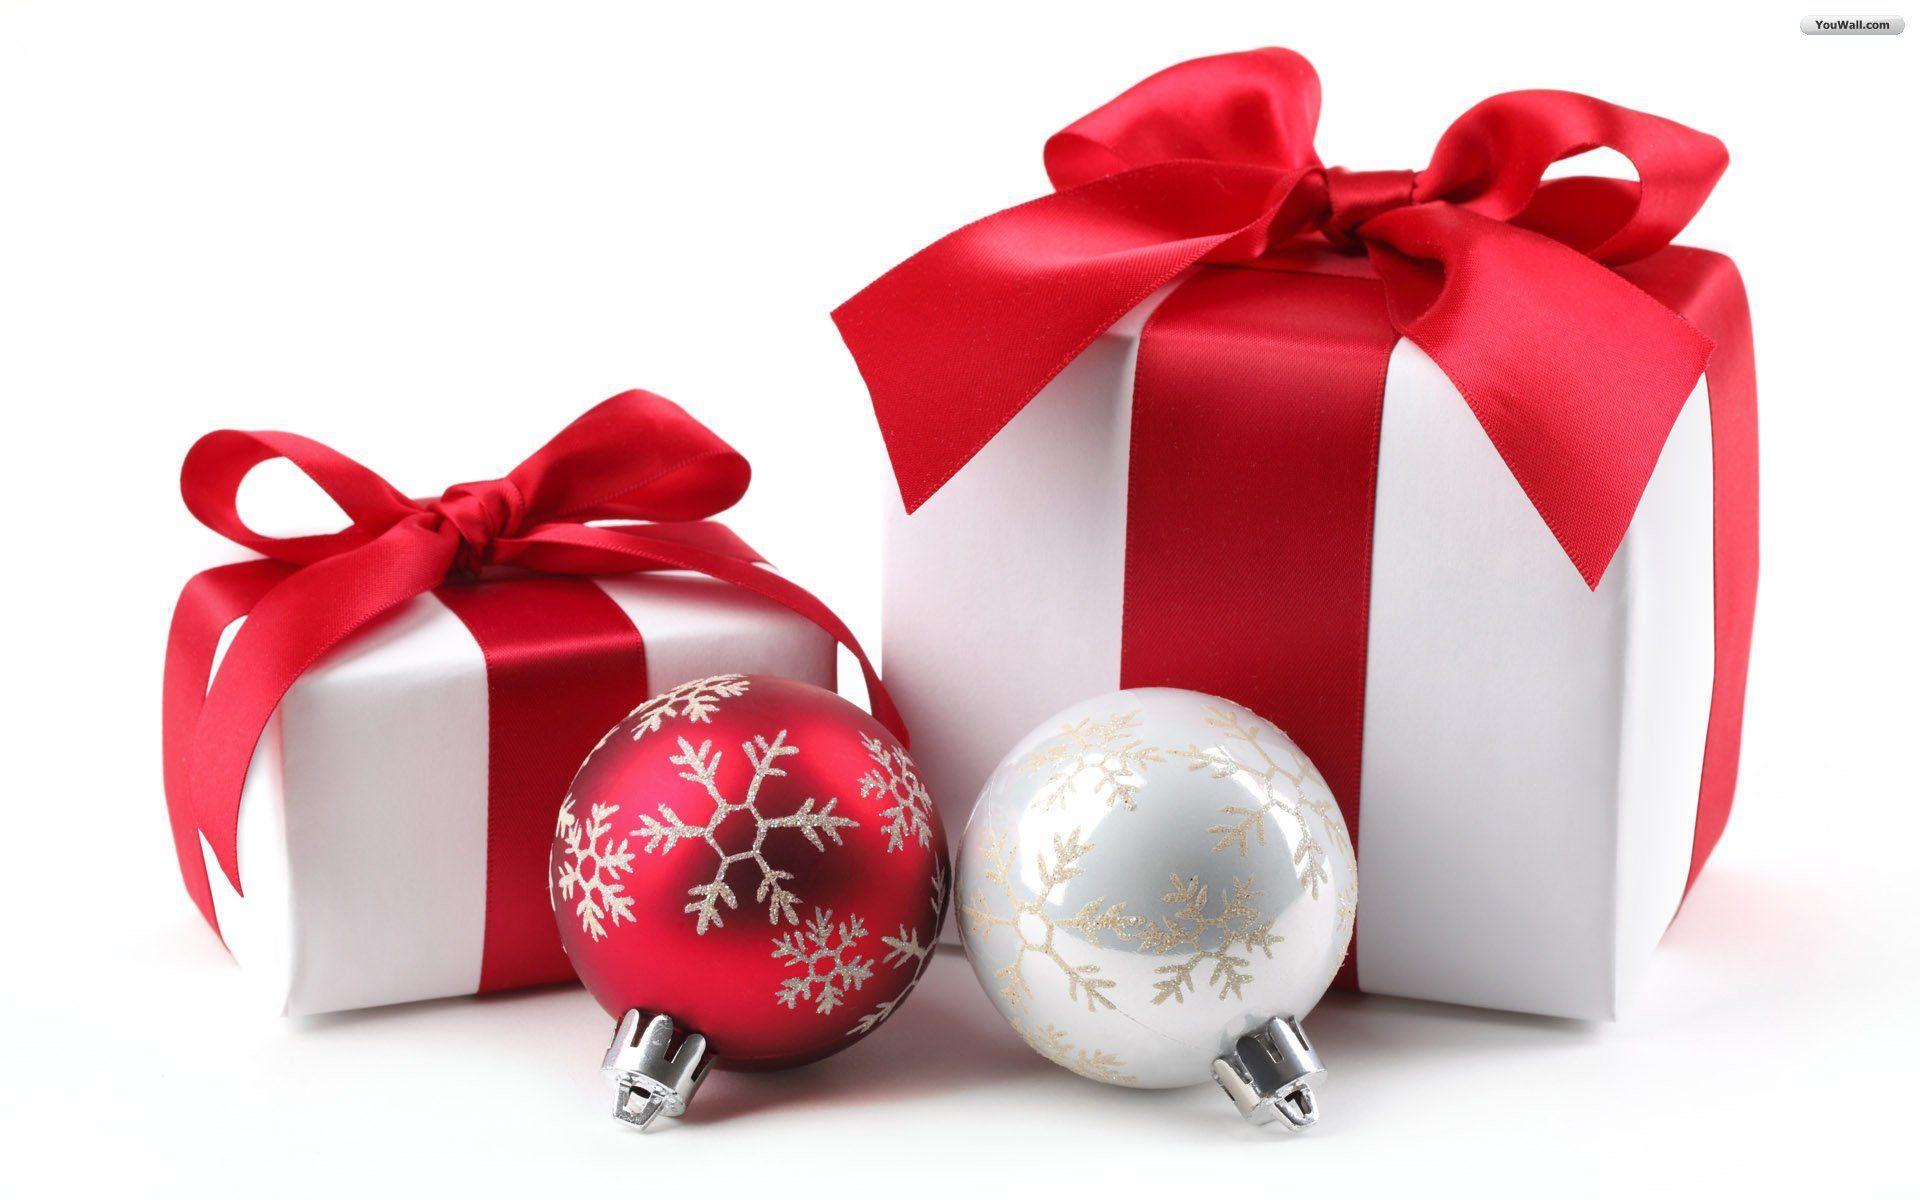 image about Christmas Gifts. Christmas gifts